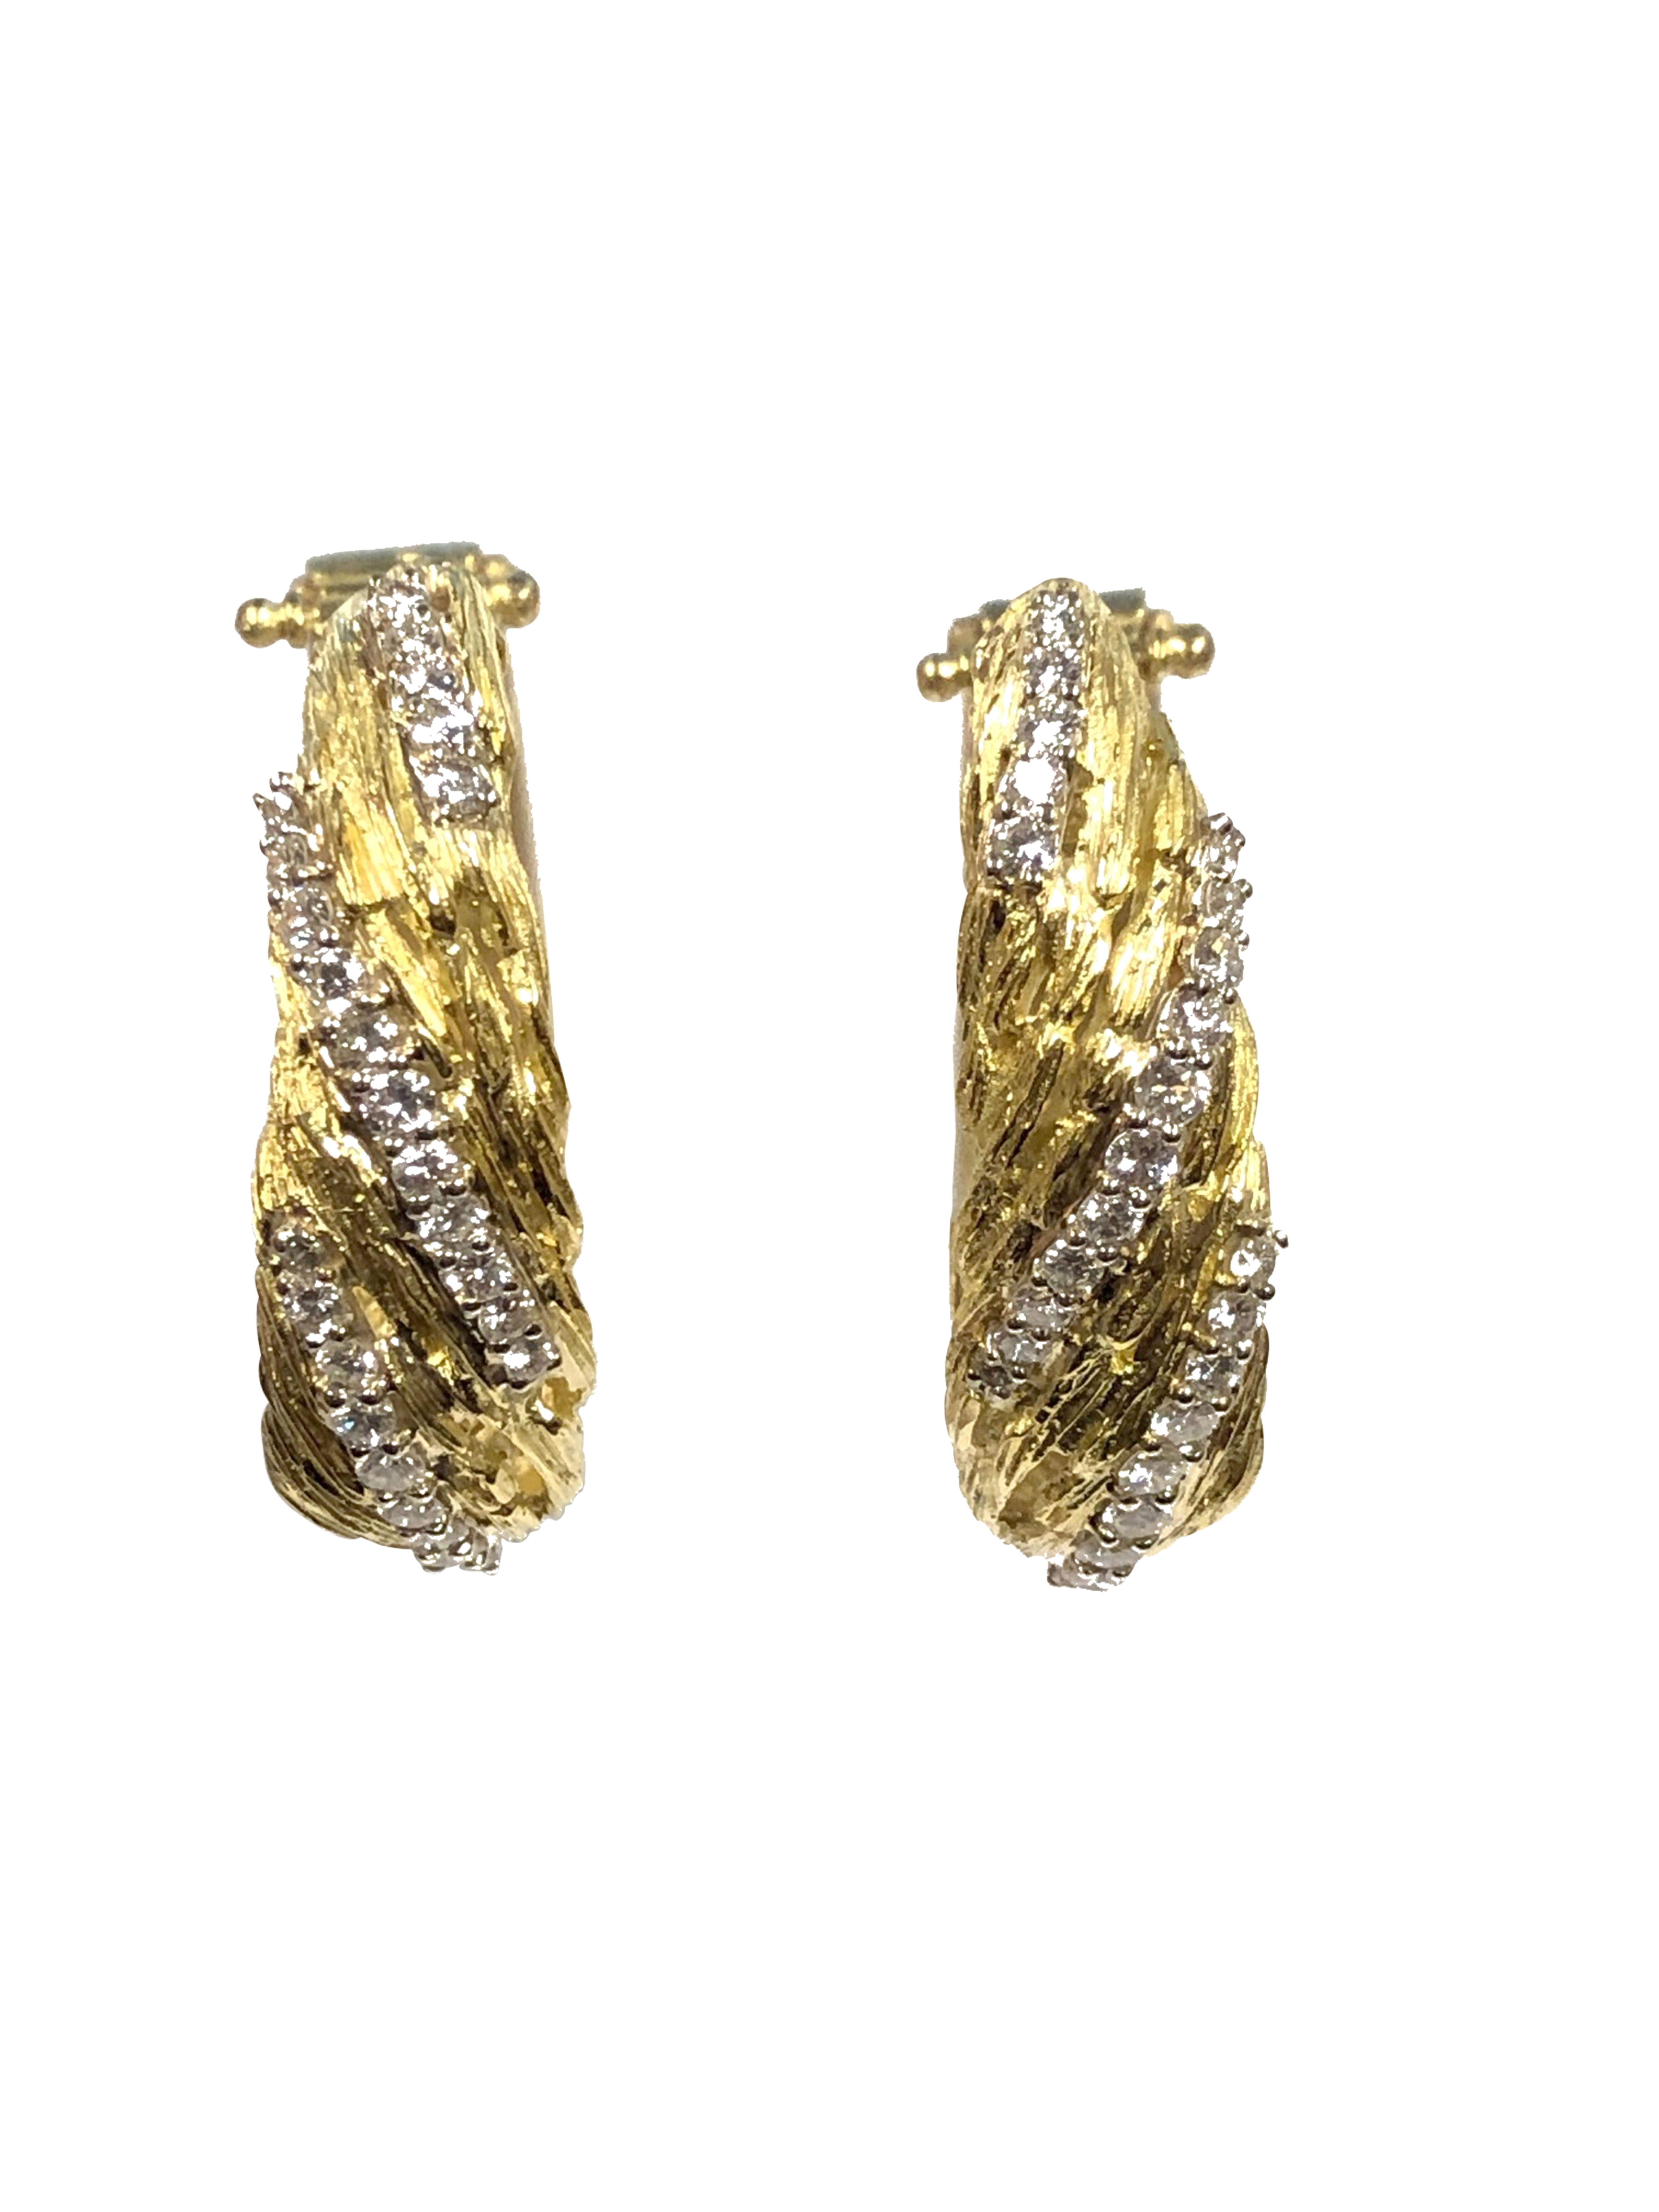 Circa 1970s 18K Yellow Gold Large and impressive Hoop Earrings, measuring 1 1/2 inches in length and 3/8 inch wide, having a textured finish on the front and set with Round Brilliant cut Diamonds totaling 2.25 Carats. Clip backs to which a post can